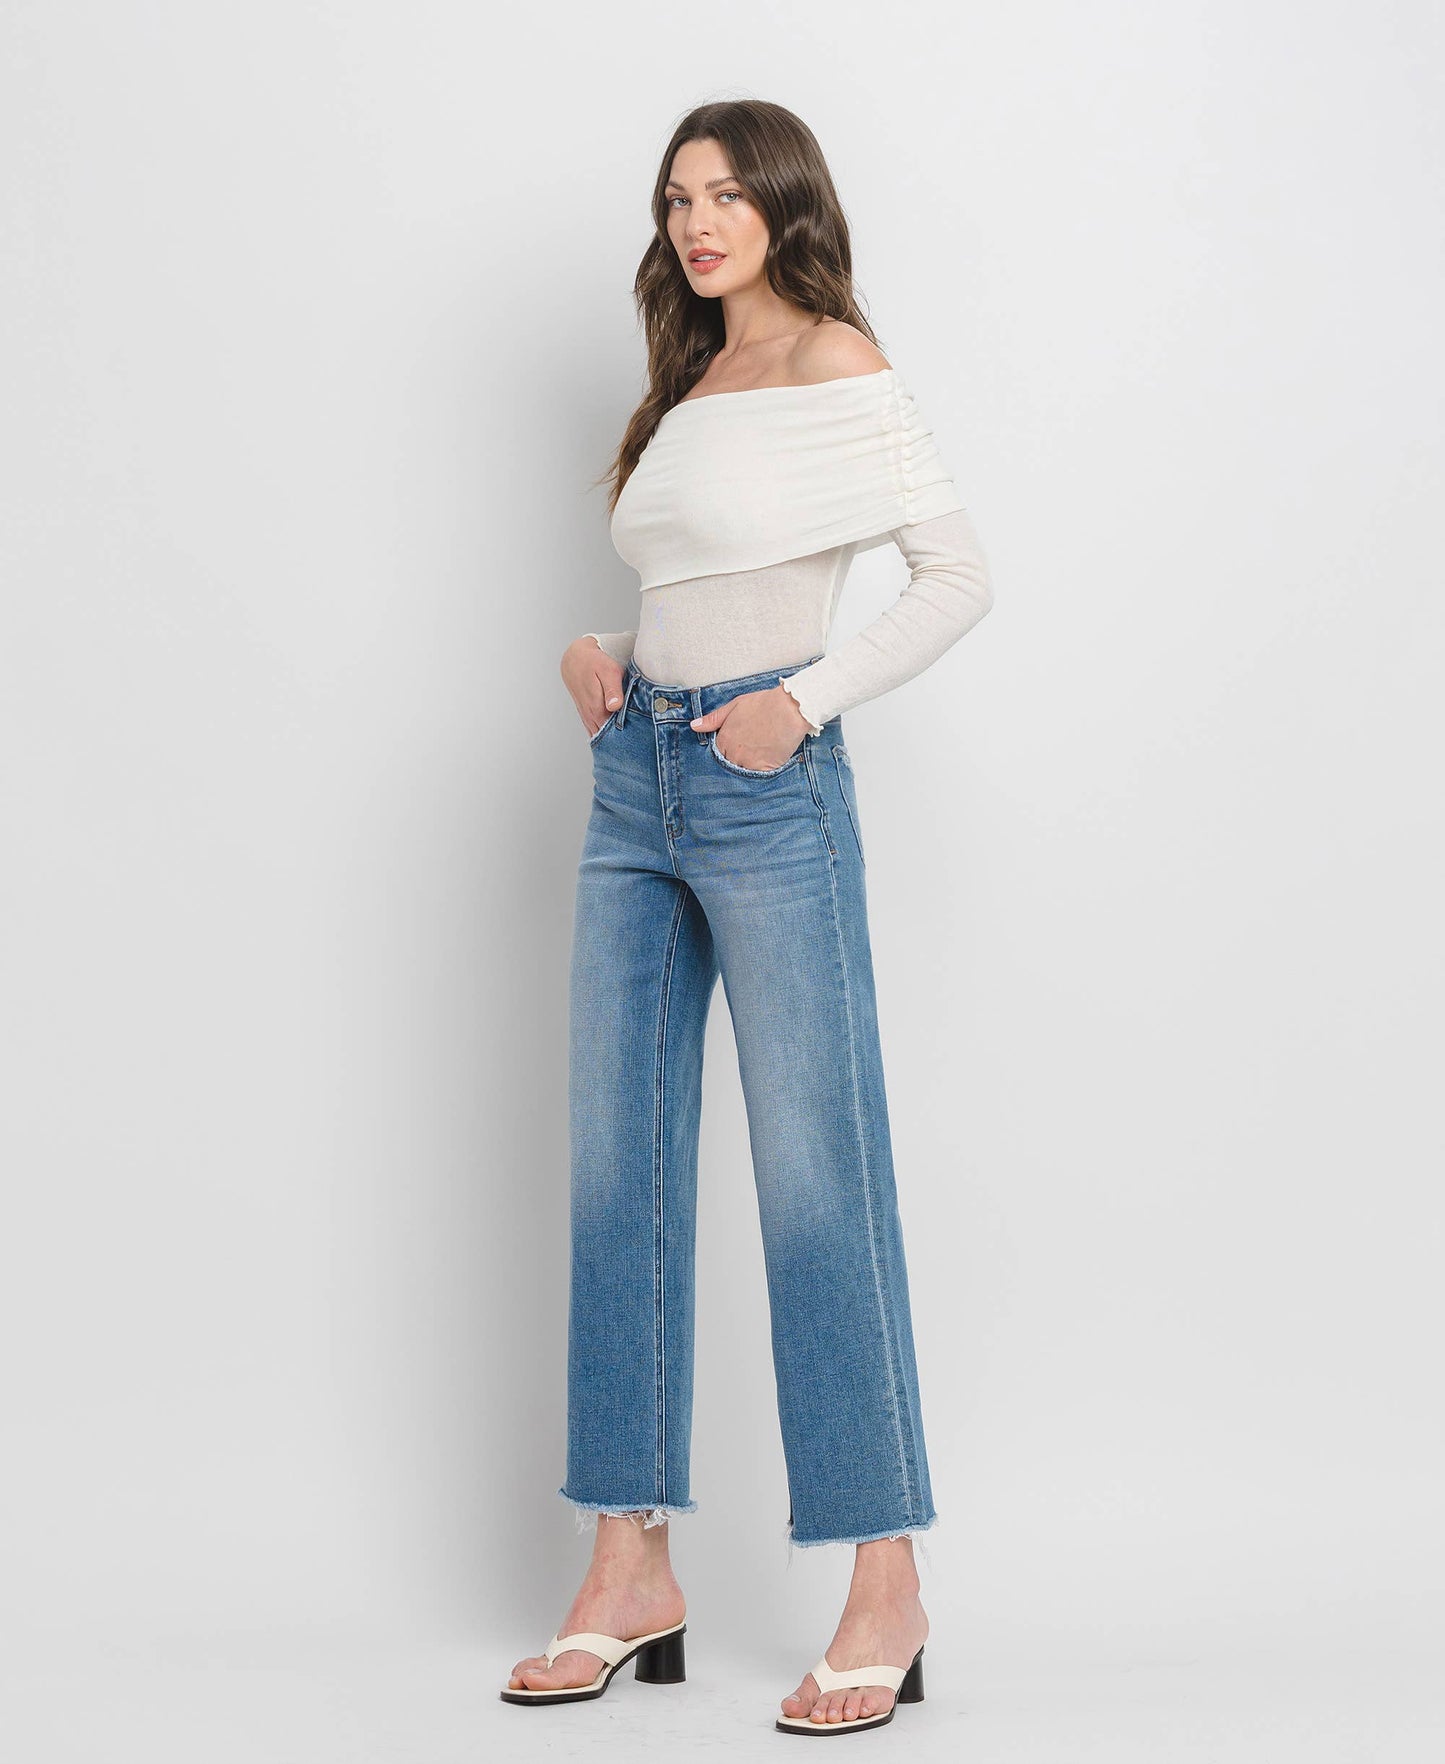 EVENING STARvHIGH RISE DAD JEANS